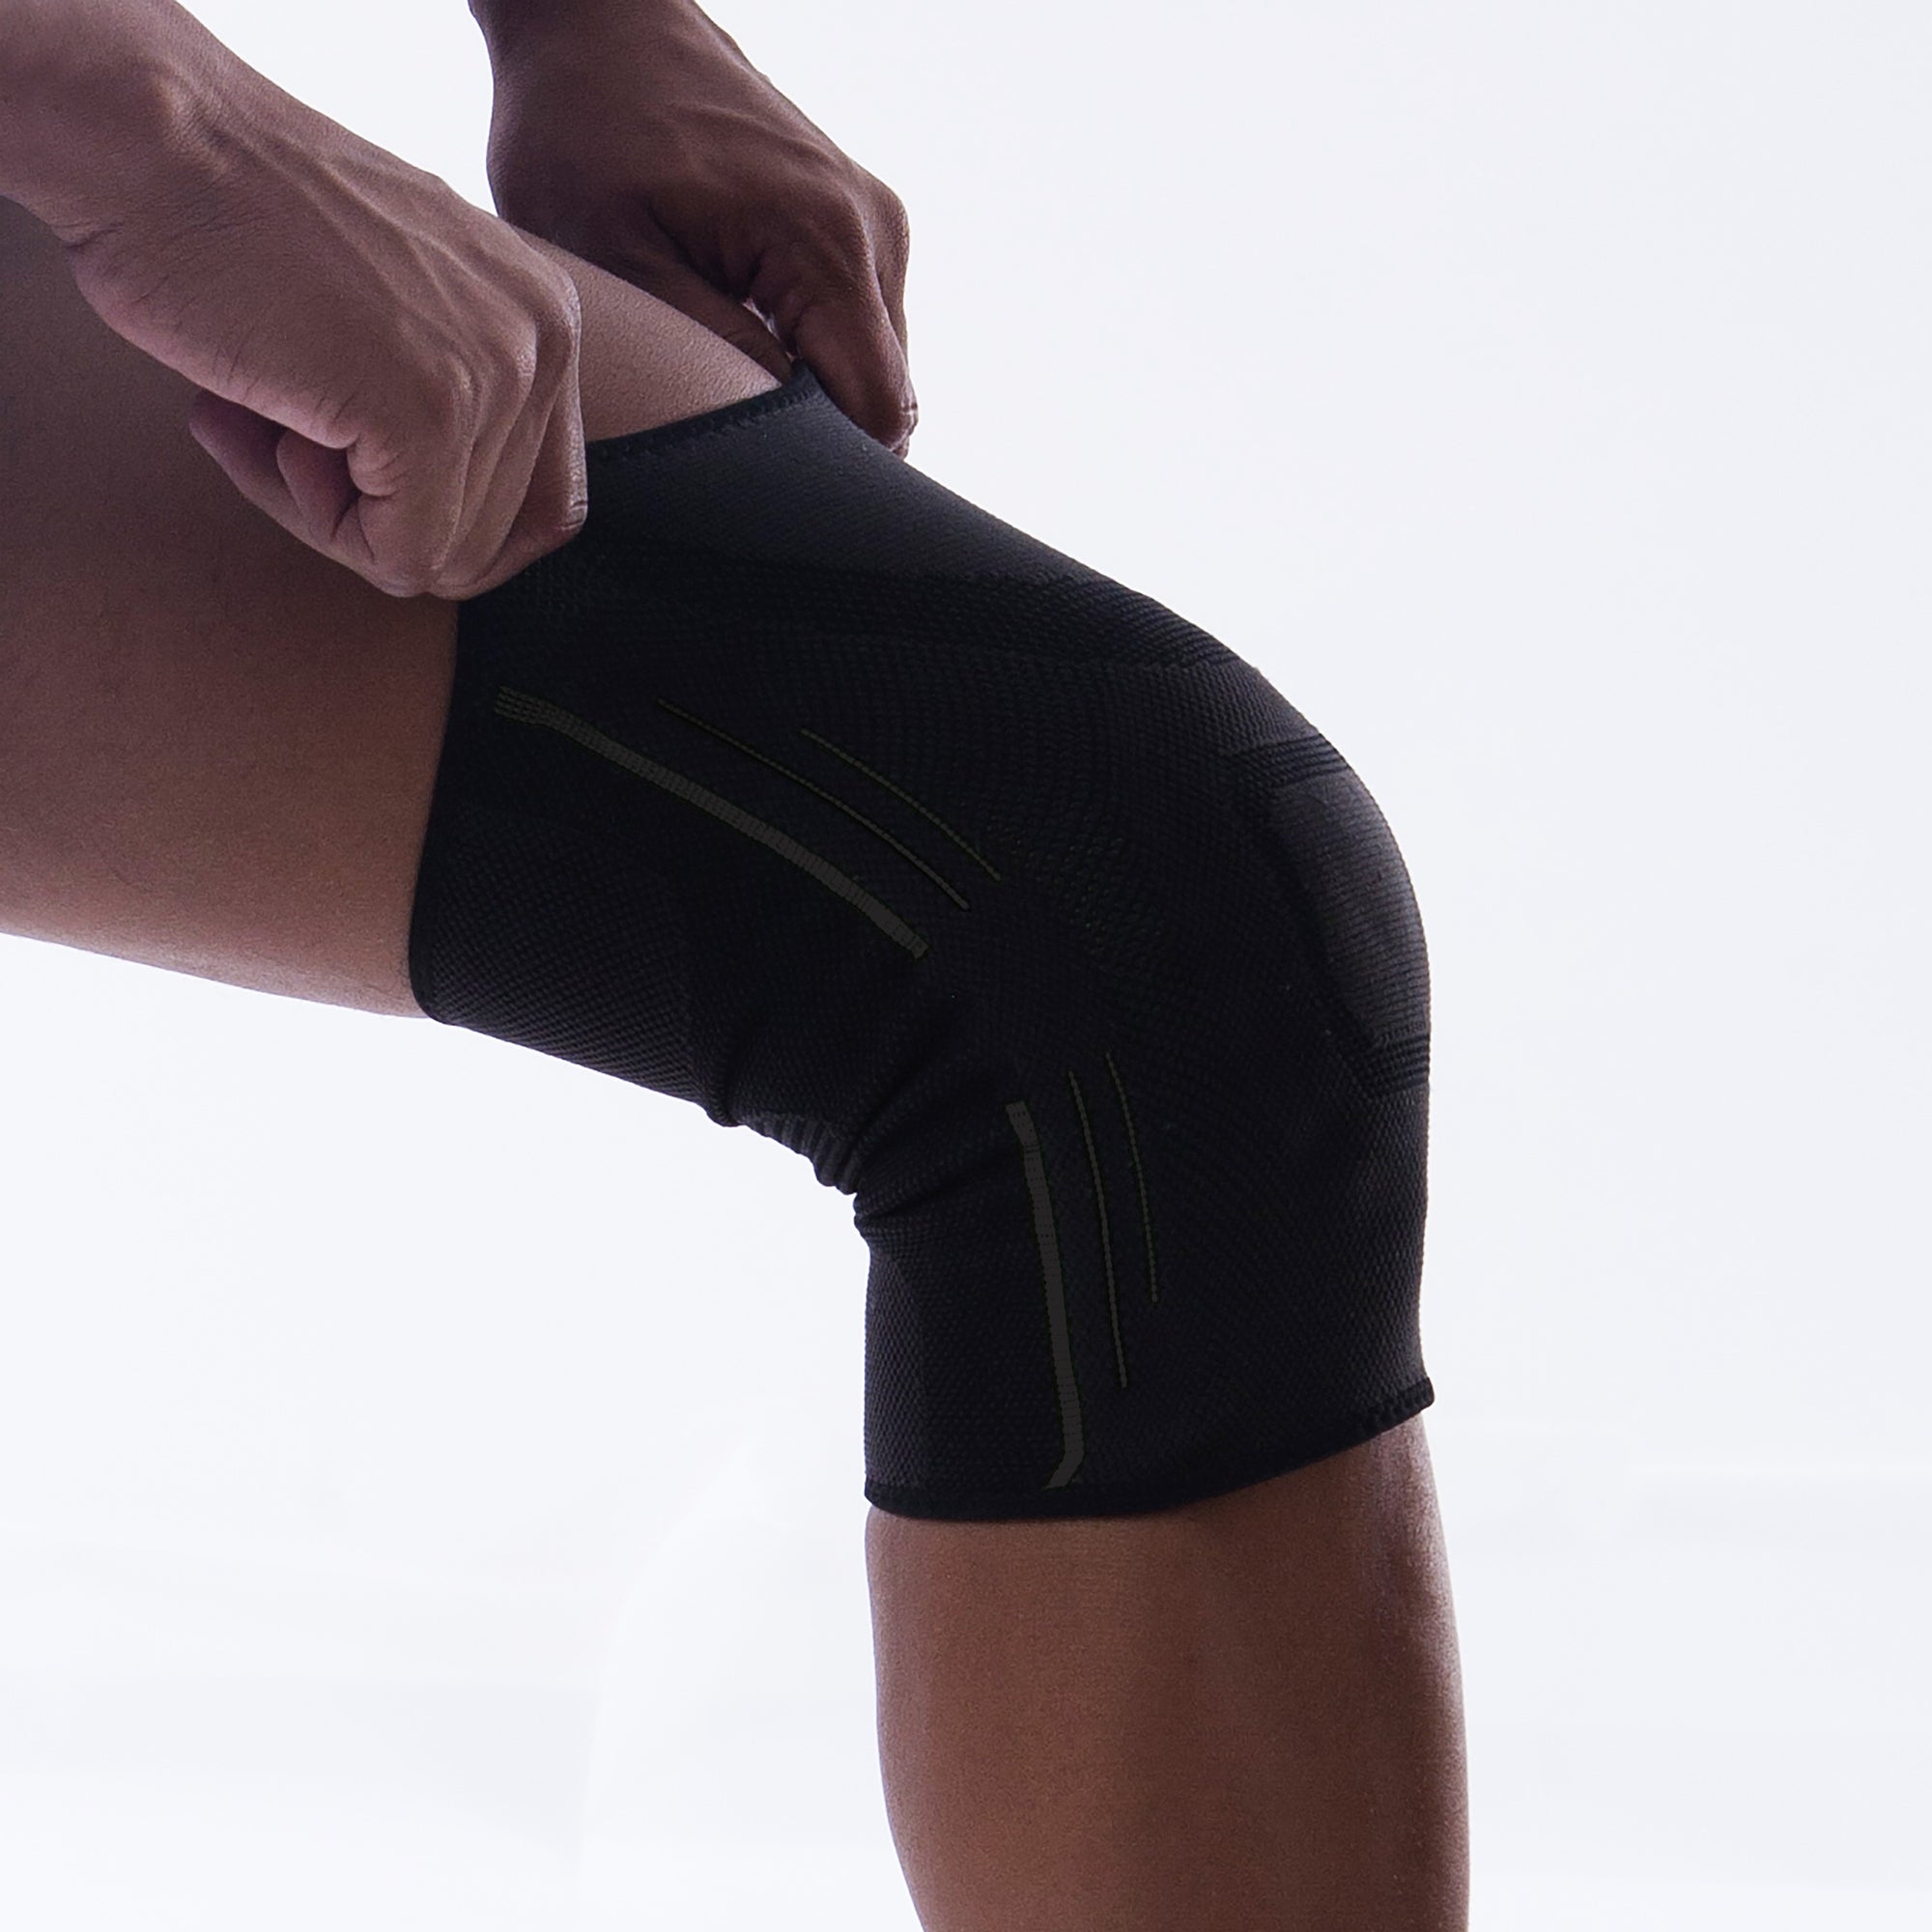 All Sports Knee Brace Knee Support